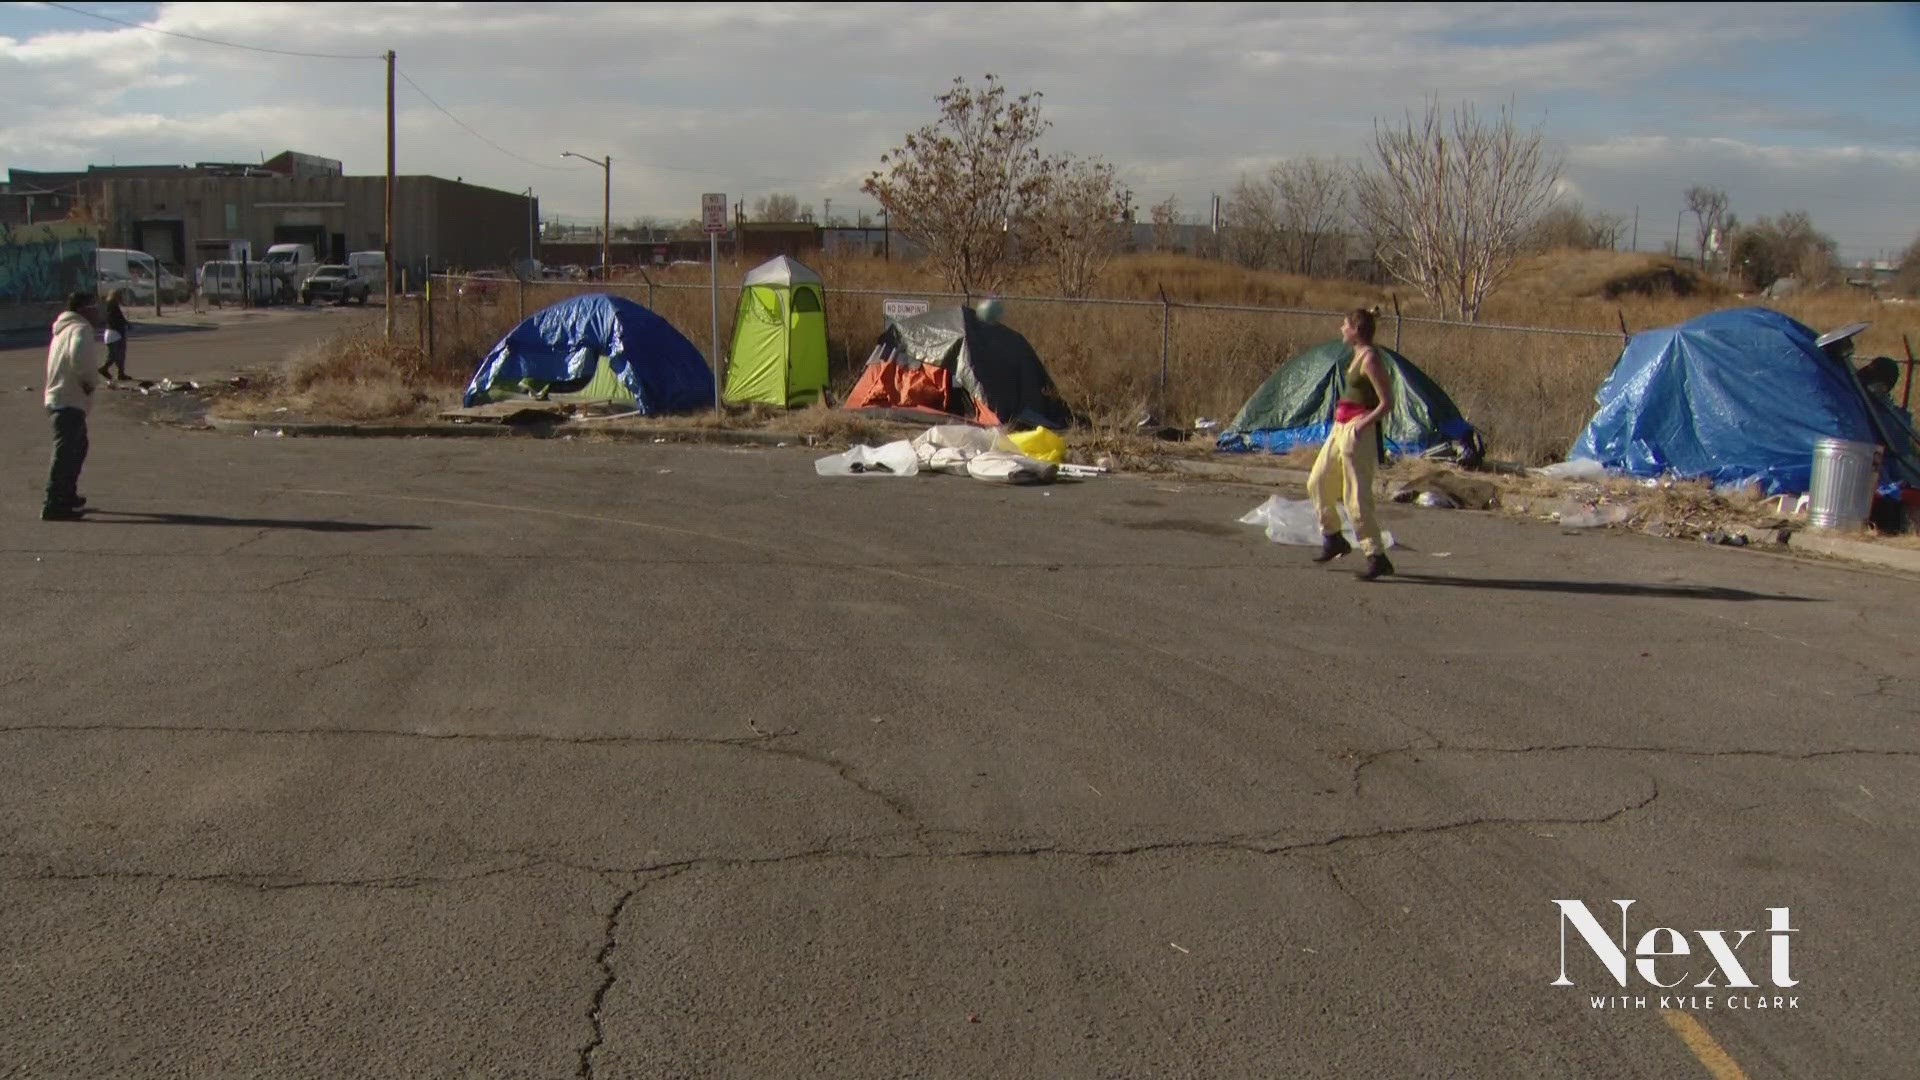 The camp was initially swept by the city on Friday. Migrants moved about 50 feet away -- and learned they will be swept again on Wednesday.